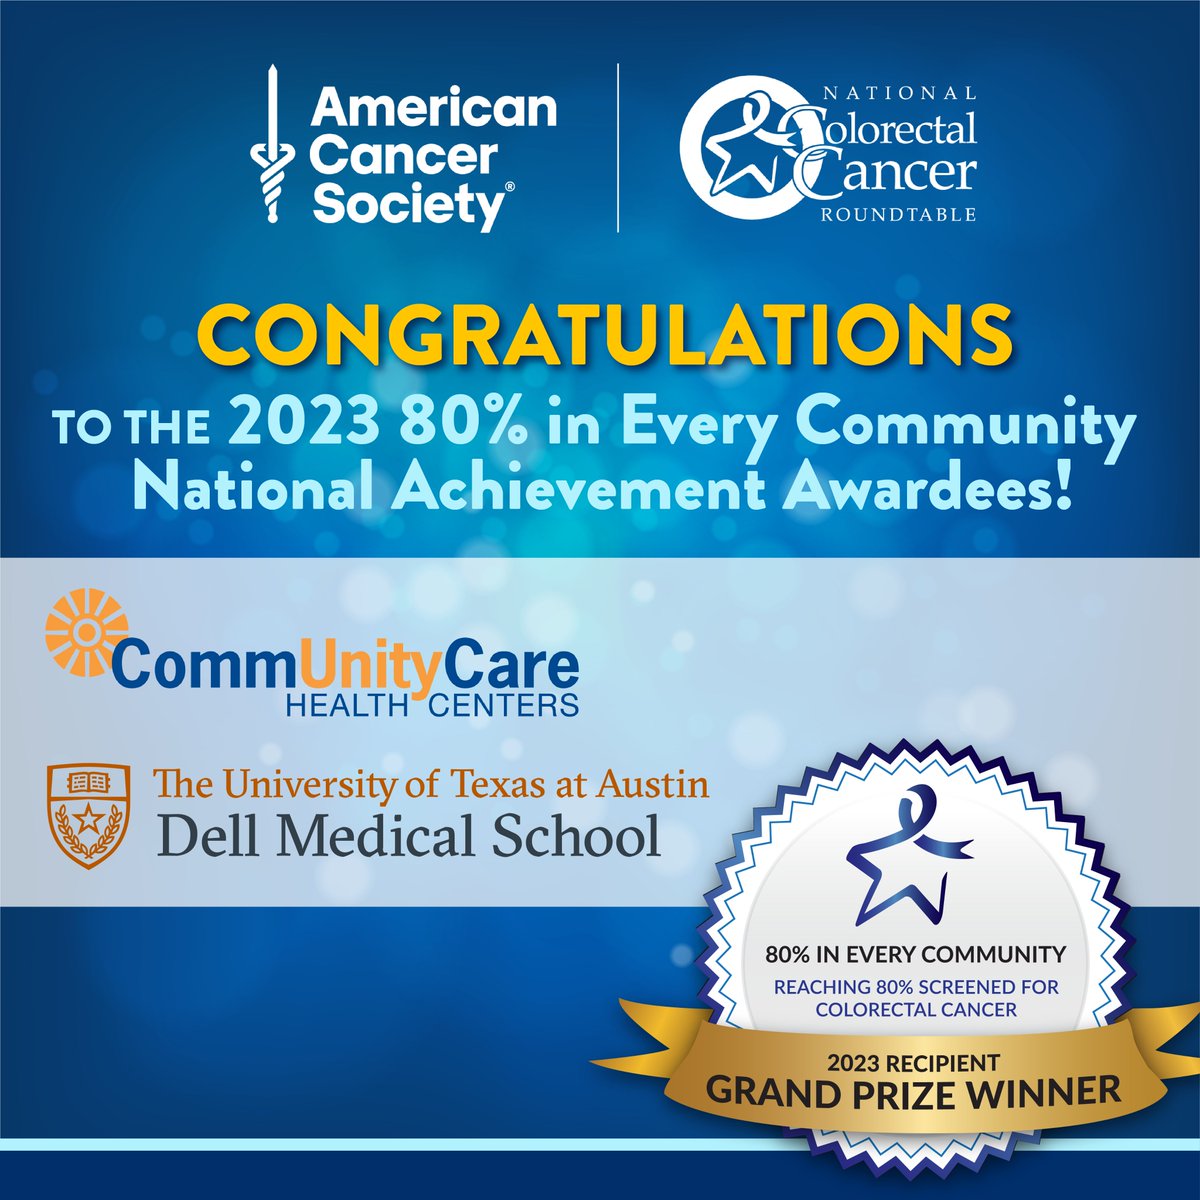 Congratulations to the Grand Prize Winner of the #80InEveryCommunity Awards: @CommUnityCareTX & @DellMedSchool! Learn how they partnered to double the #colorectalcancer screening rate and eliminate disparities in less than 5 years: nccrt.org/2023-awards/